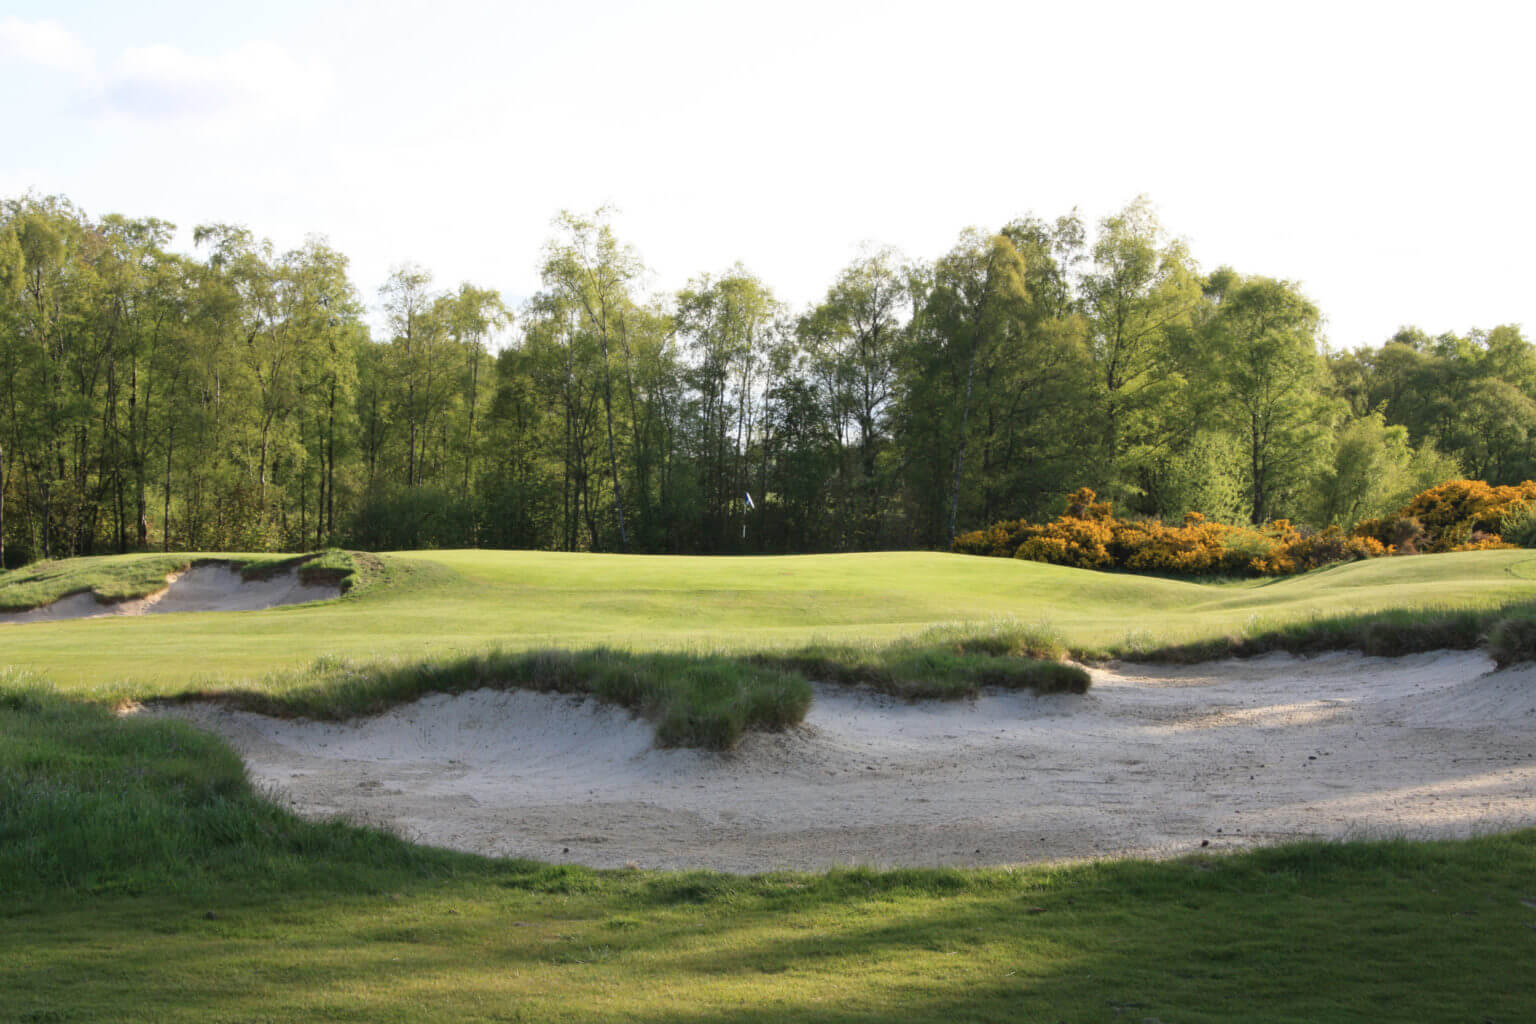 Image of a bunker and first green at Duke's Golf Course